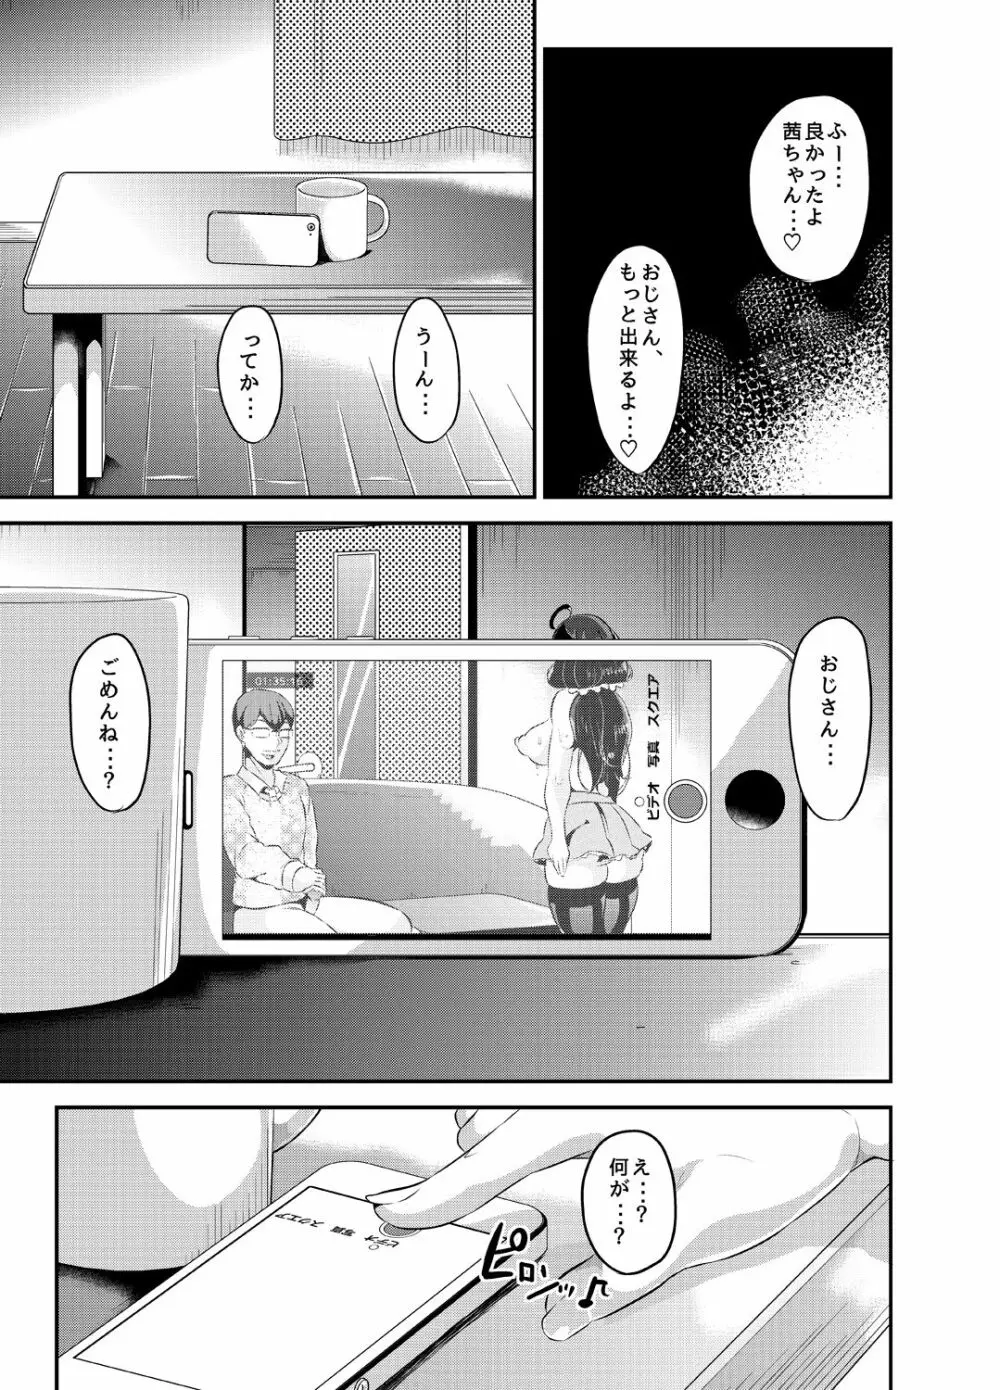 好き好き好き好き好き好き好き好き ver.4 Page.22